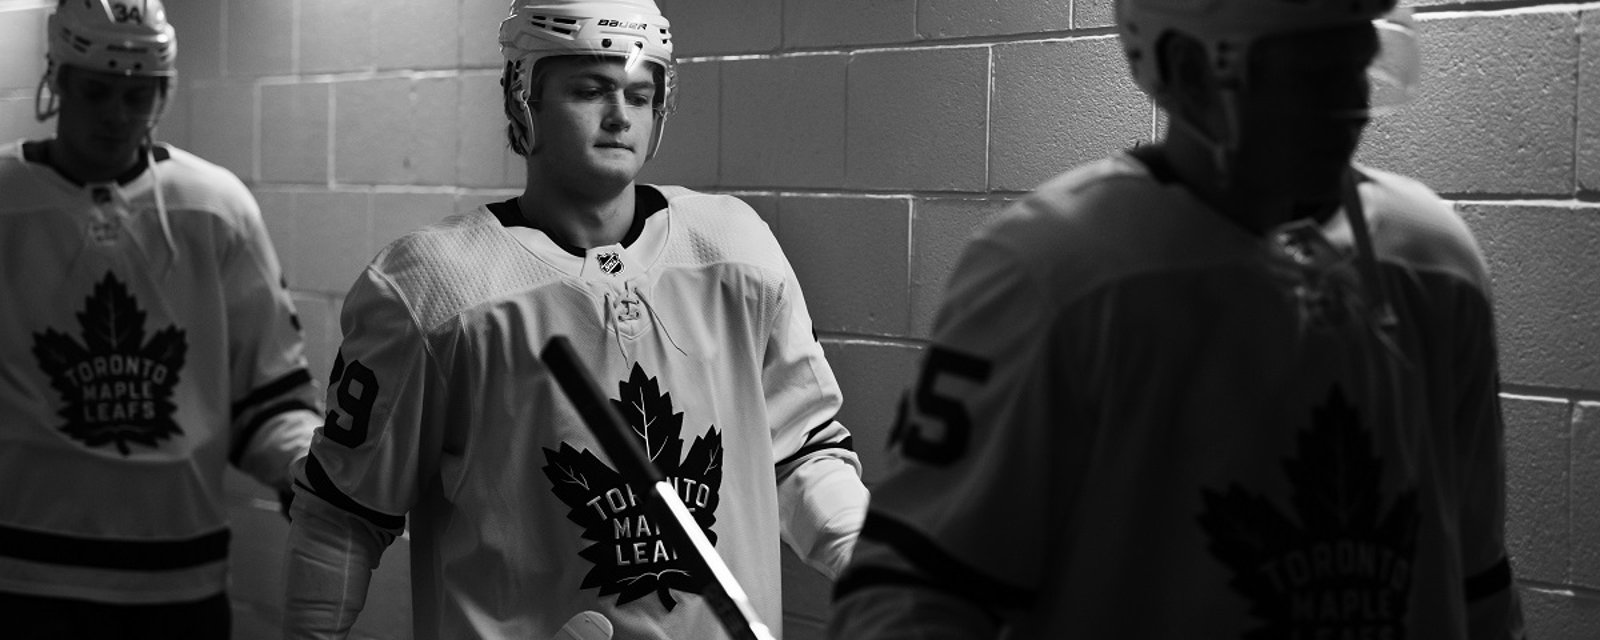 Insider confirms Leafs prepared to take extreme measures in Nylander negotiations.